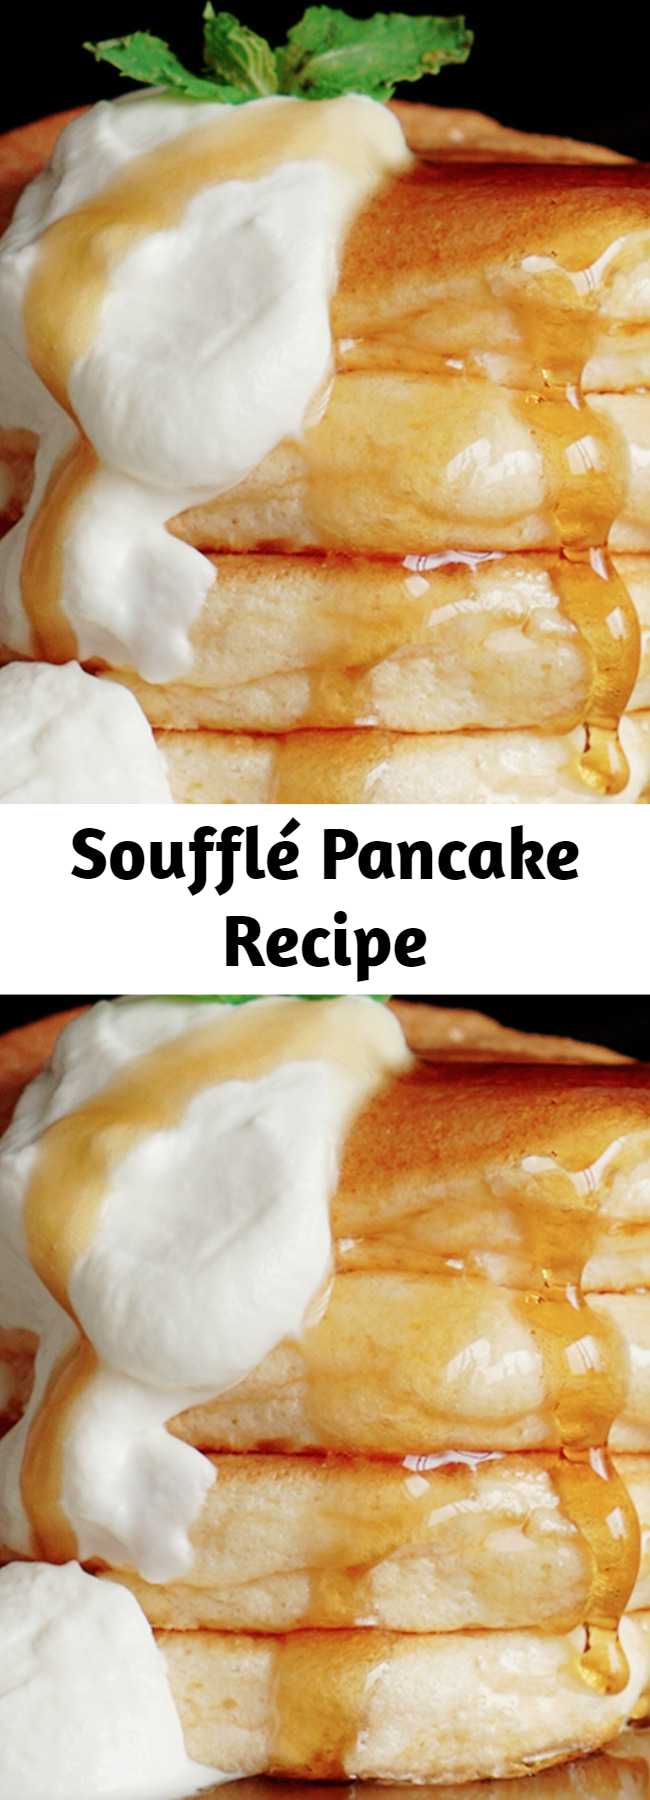 Soufflé Pancake Recipe - For flapjacks that are extra fluffy try separating the egg whites from the yolks in the style of a soufflé.